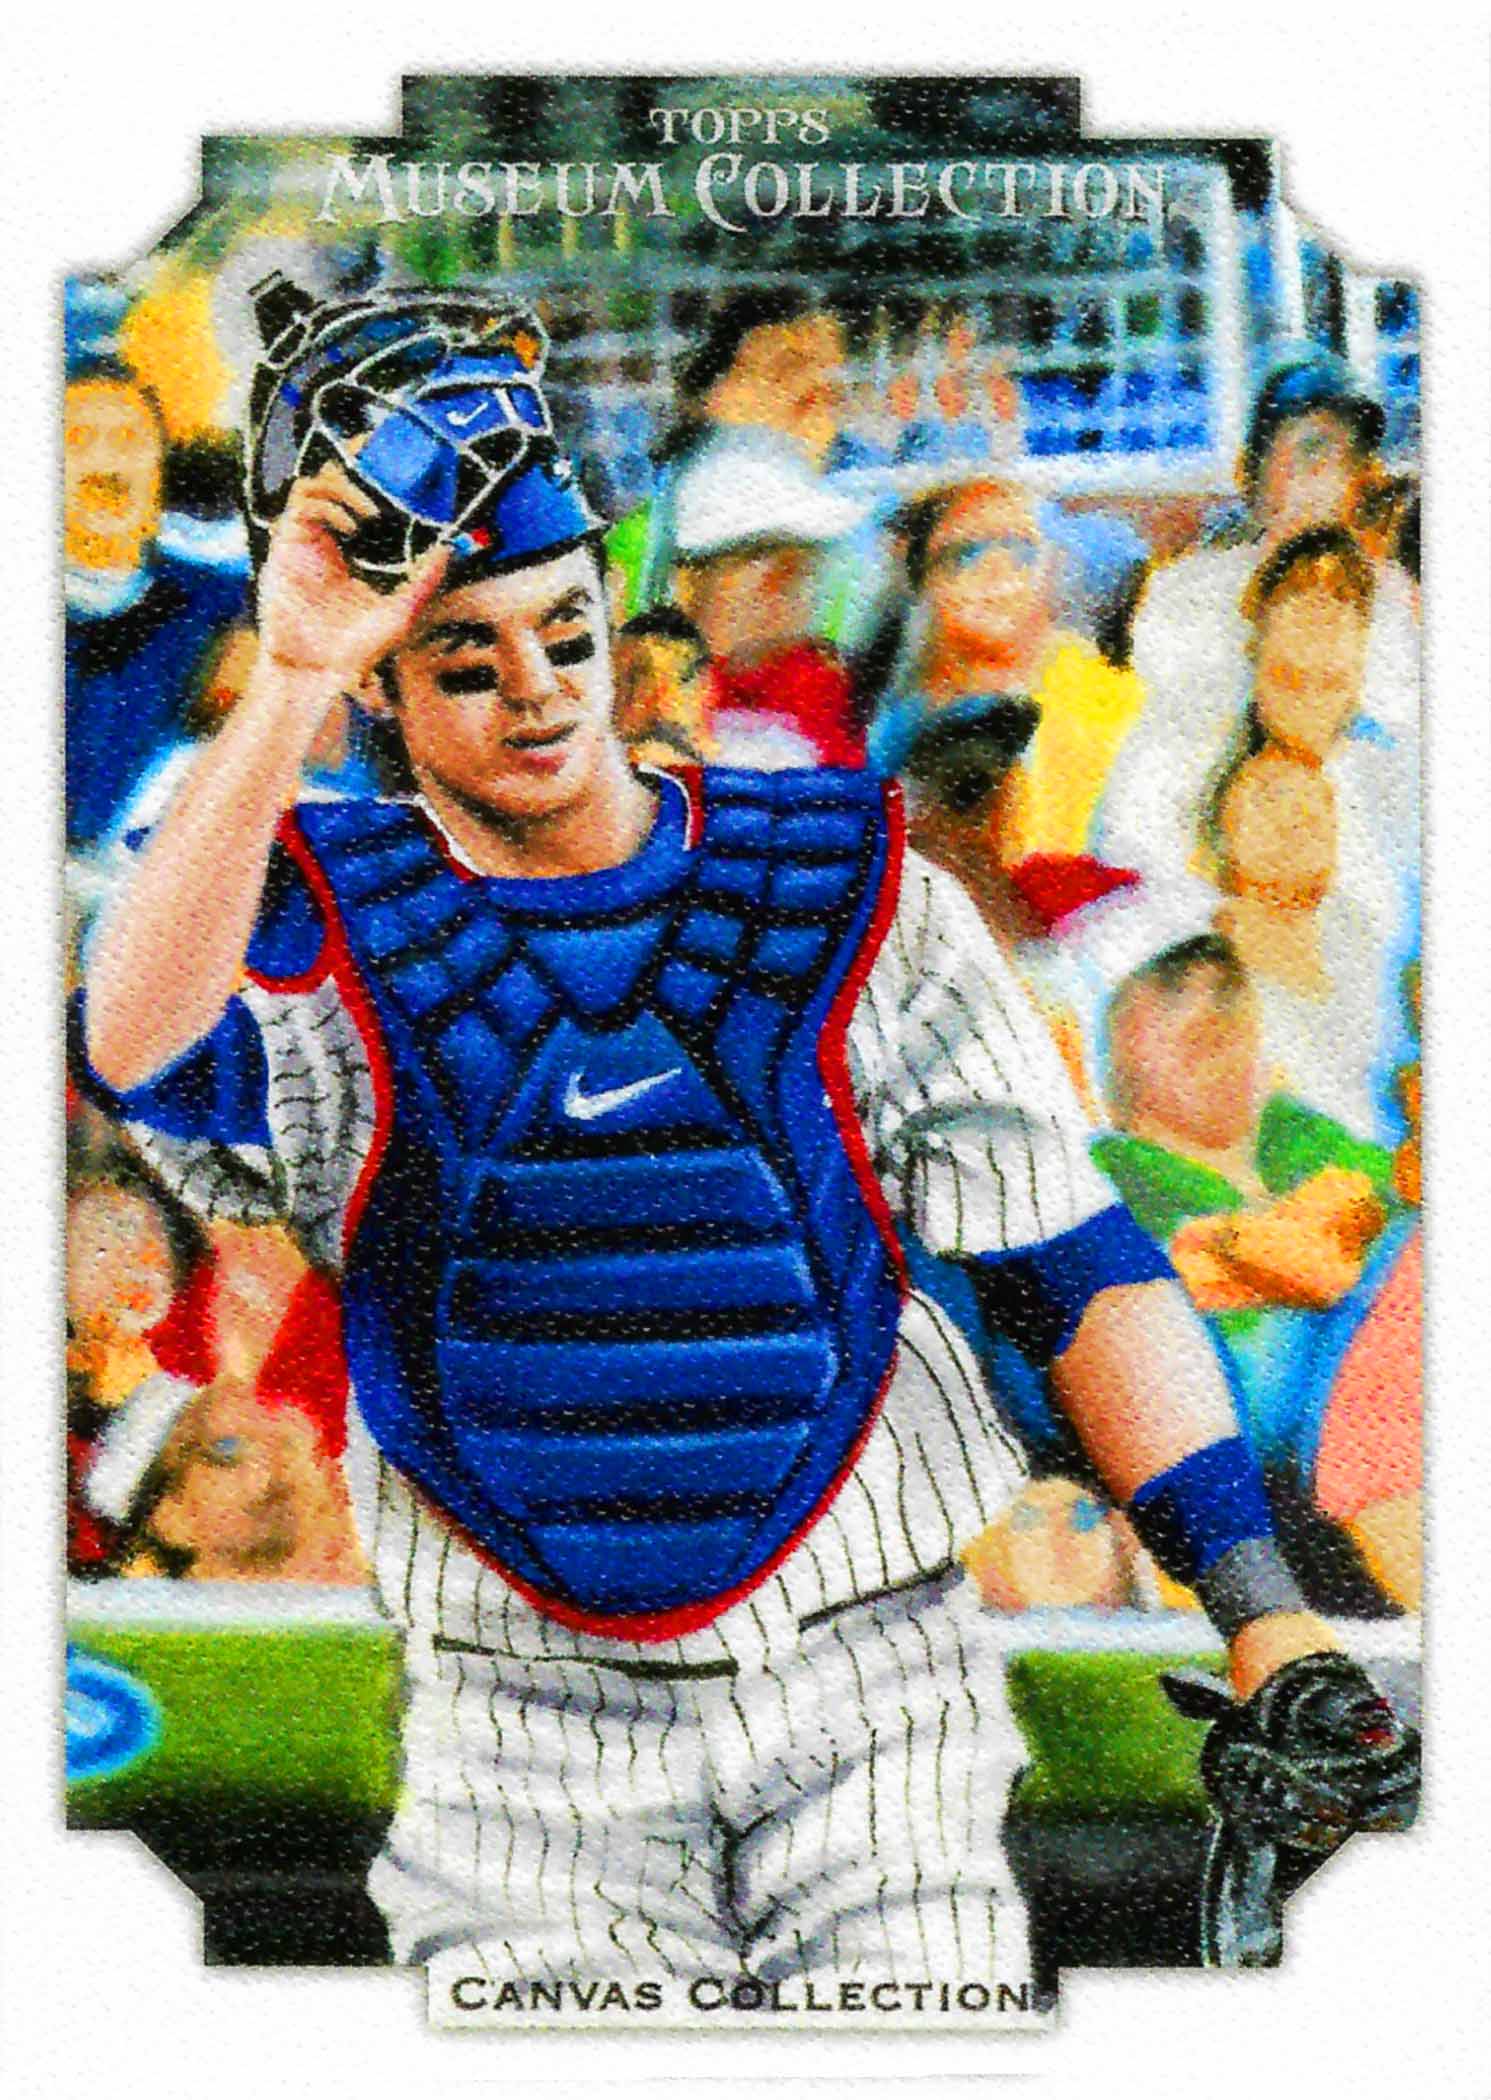 2012 Topps Museum Collection Canvas Collection